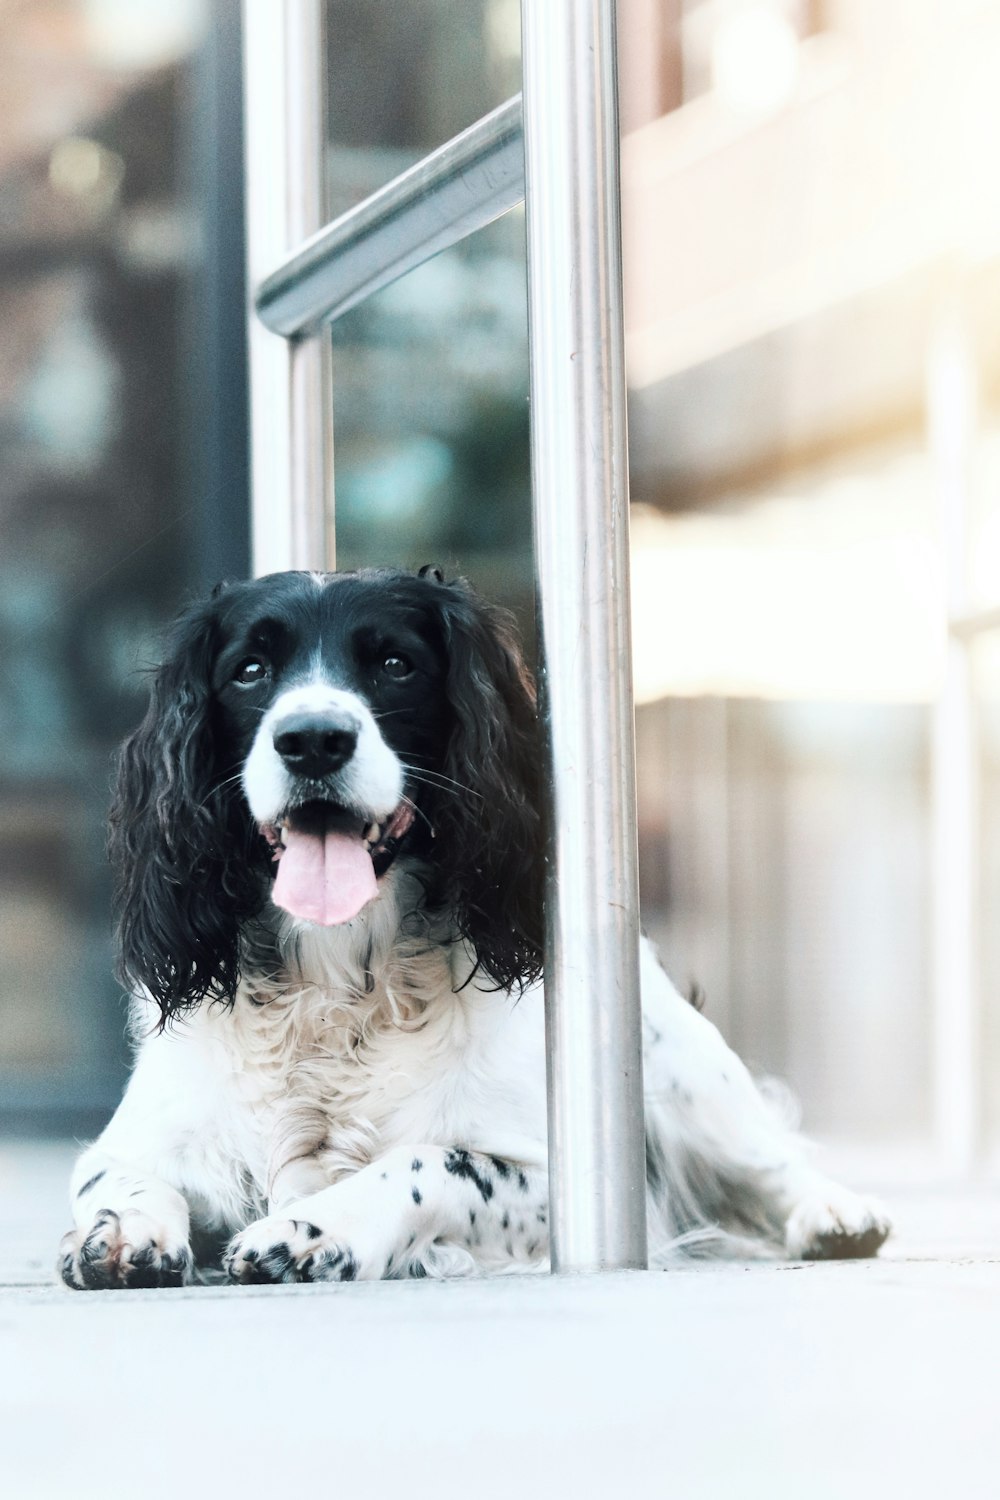 a black and white dog sitting next to a metal pole